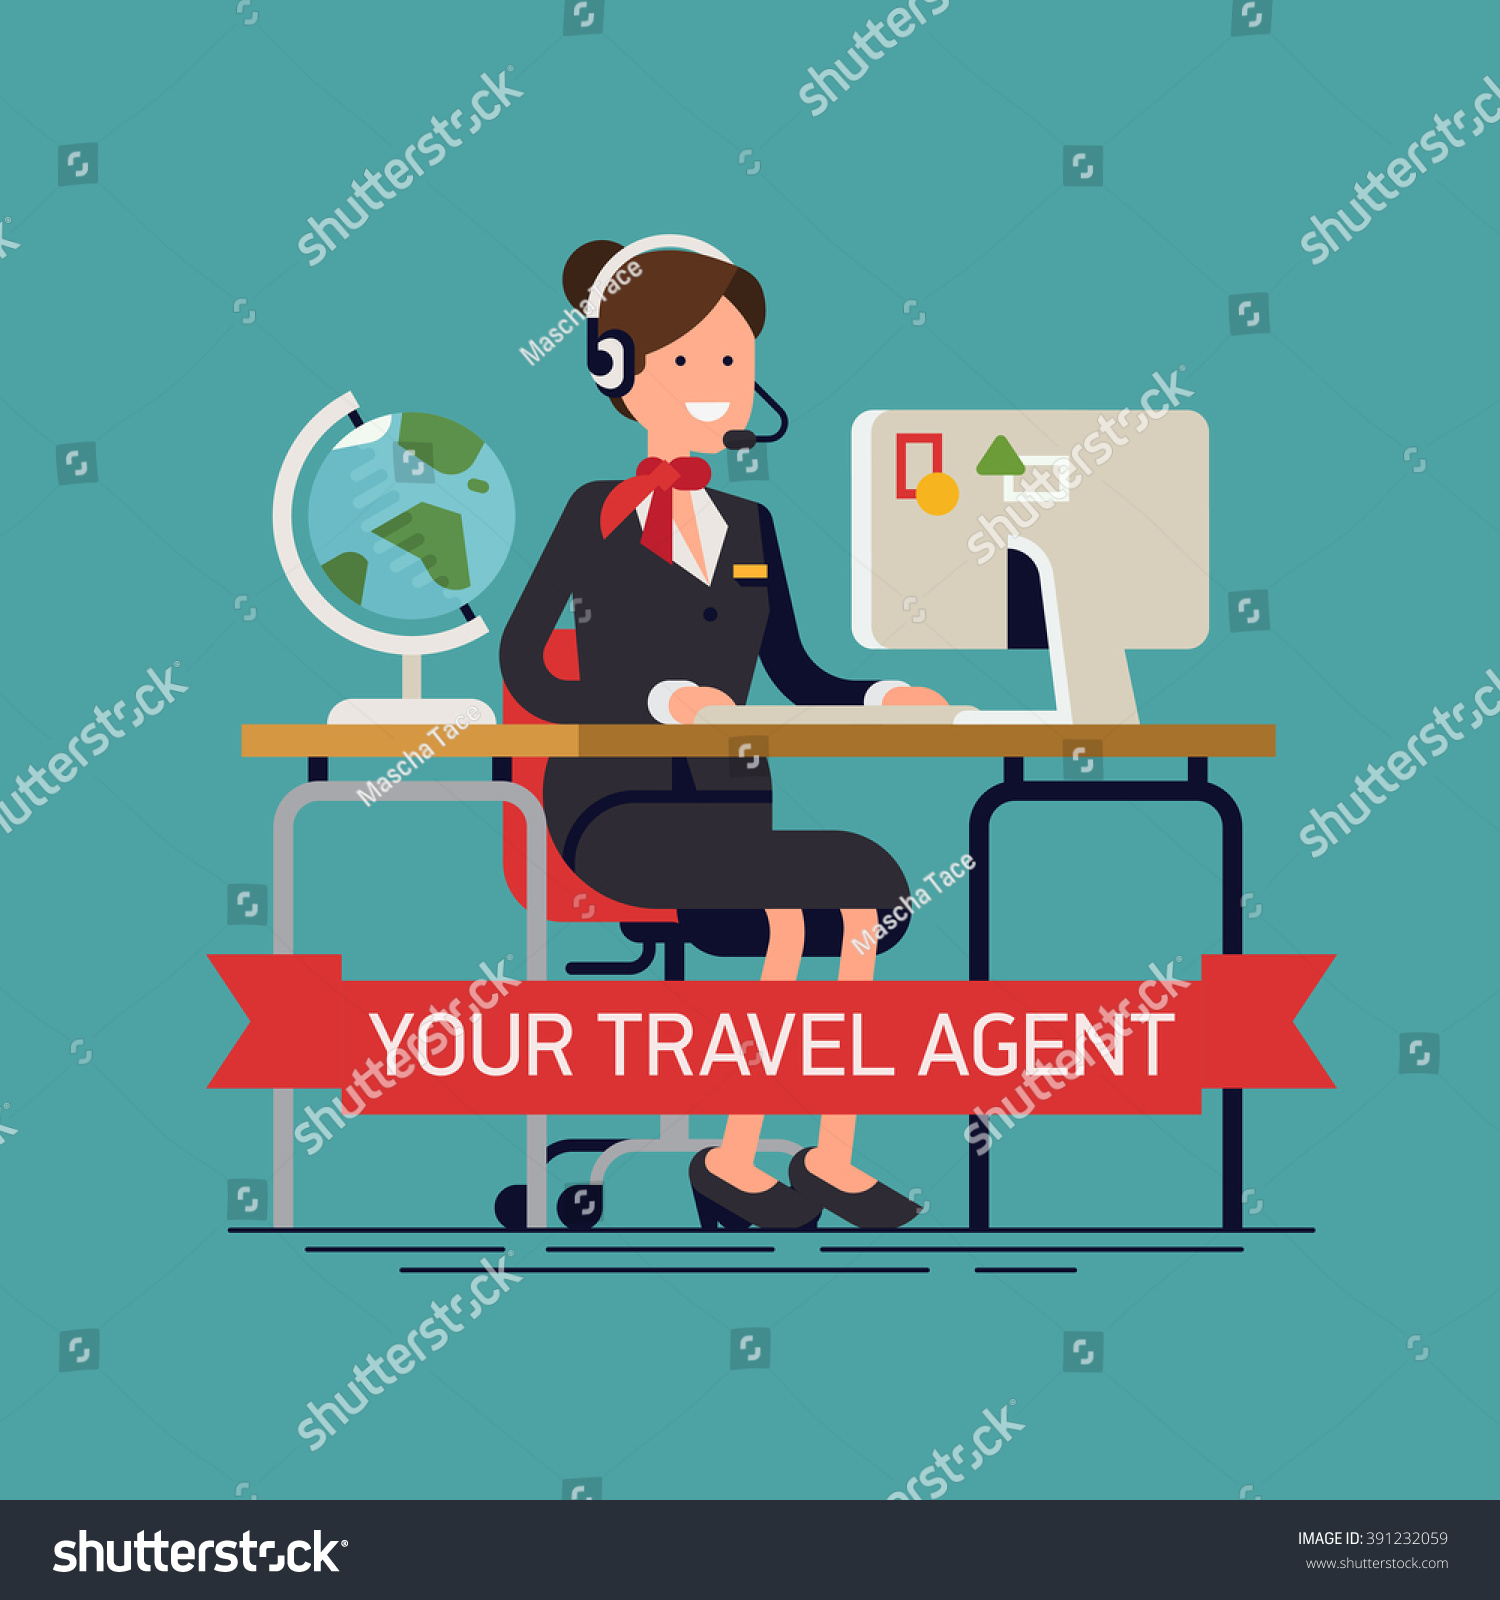 free clip art for travel agents - photo #26